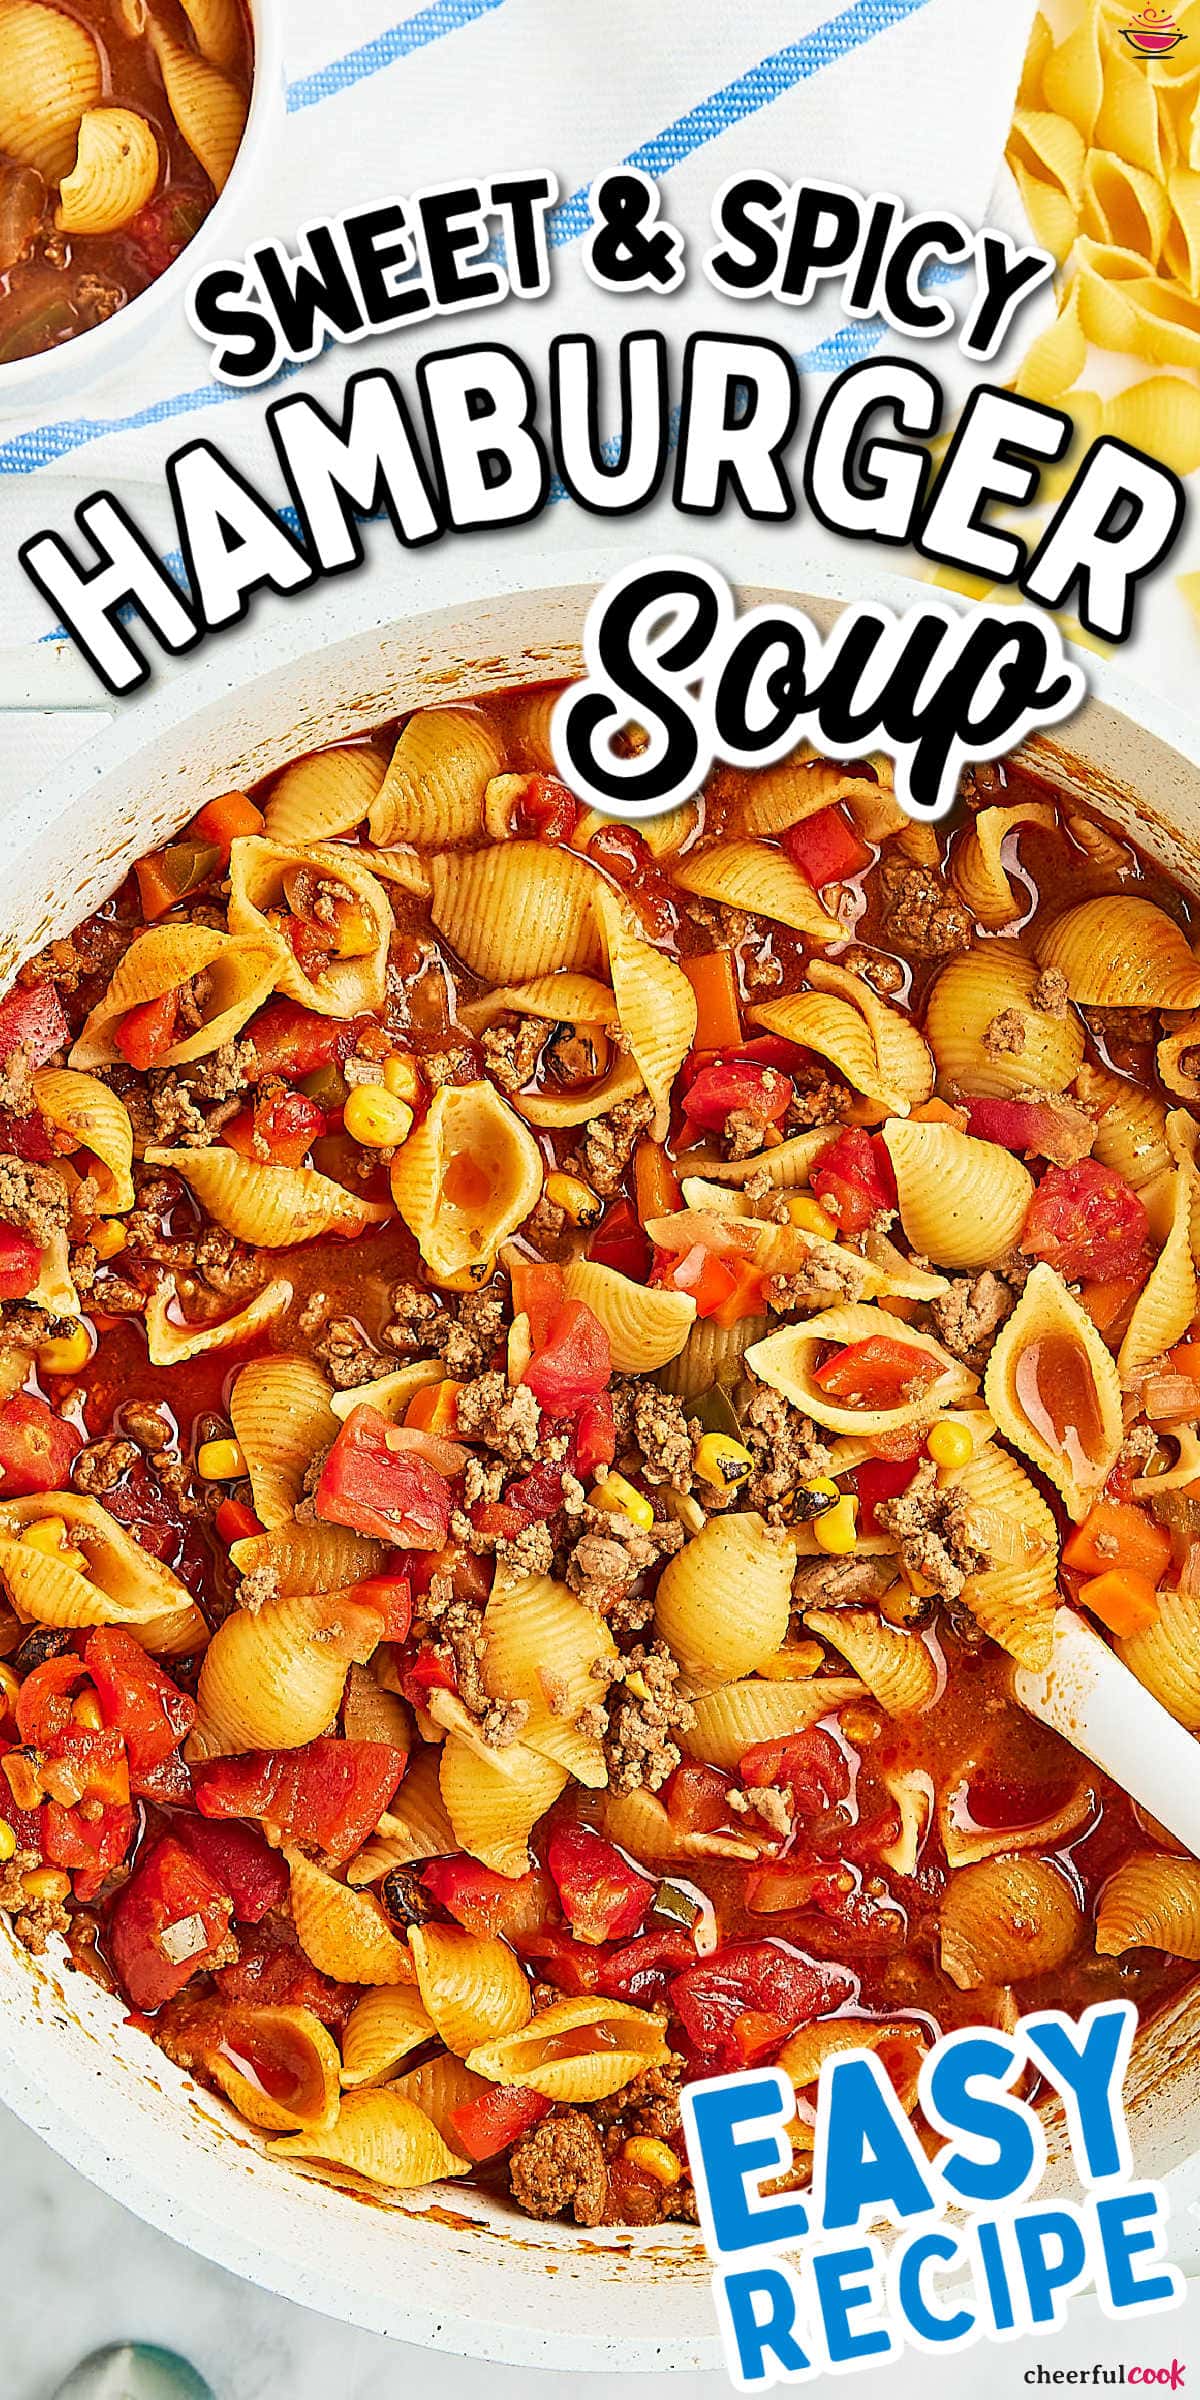 Looking for an easy and hearty meal? Try our Sweet & Spicy Hamburger Soup! This simple, flavorful recipe is sure to become a favorite. Perfect for weeknight dinners and great for leftovers! 🍲 #cheerfulcook #HamburgerSoup #SoupRecipes #ComfortFood #EasyRecipes #groundbeefrecipe #groundbeefsoup  via @cheerfulcook